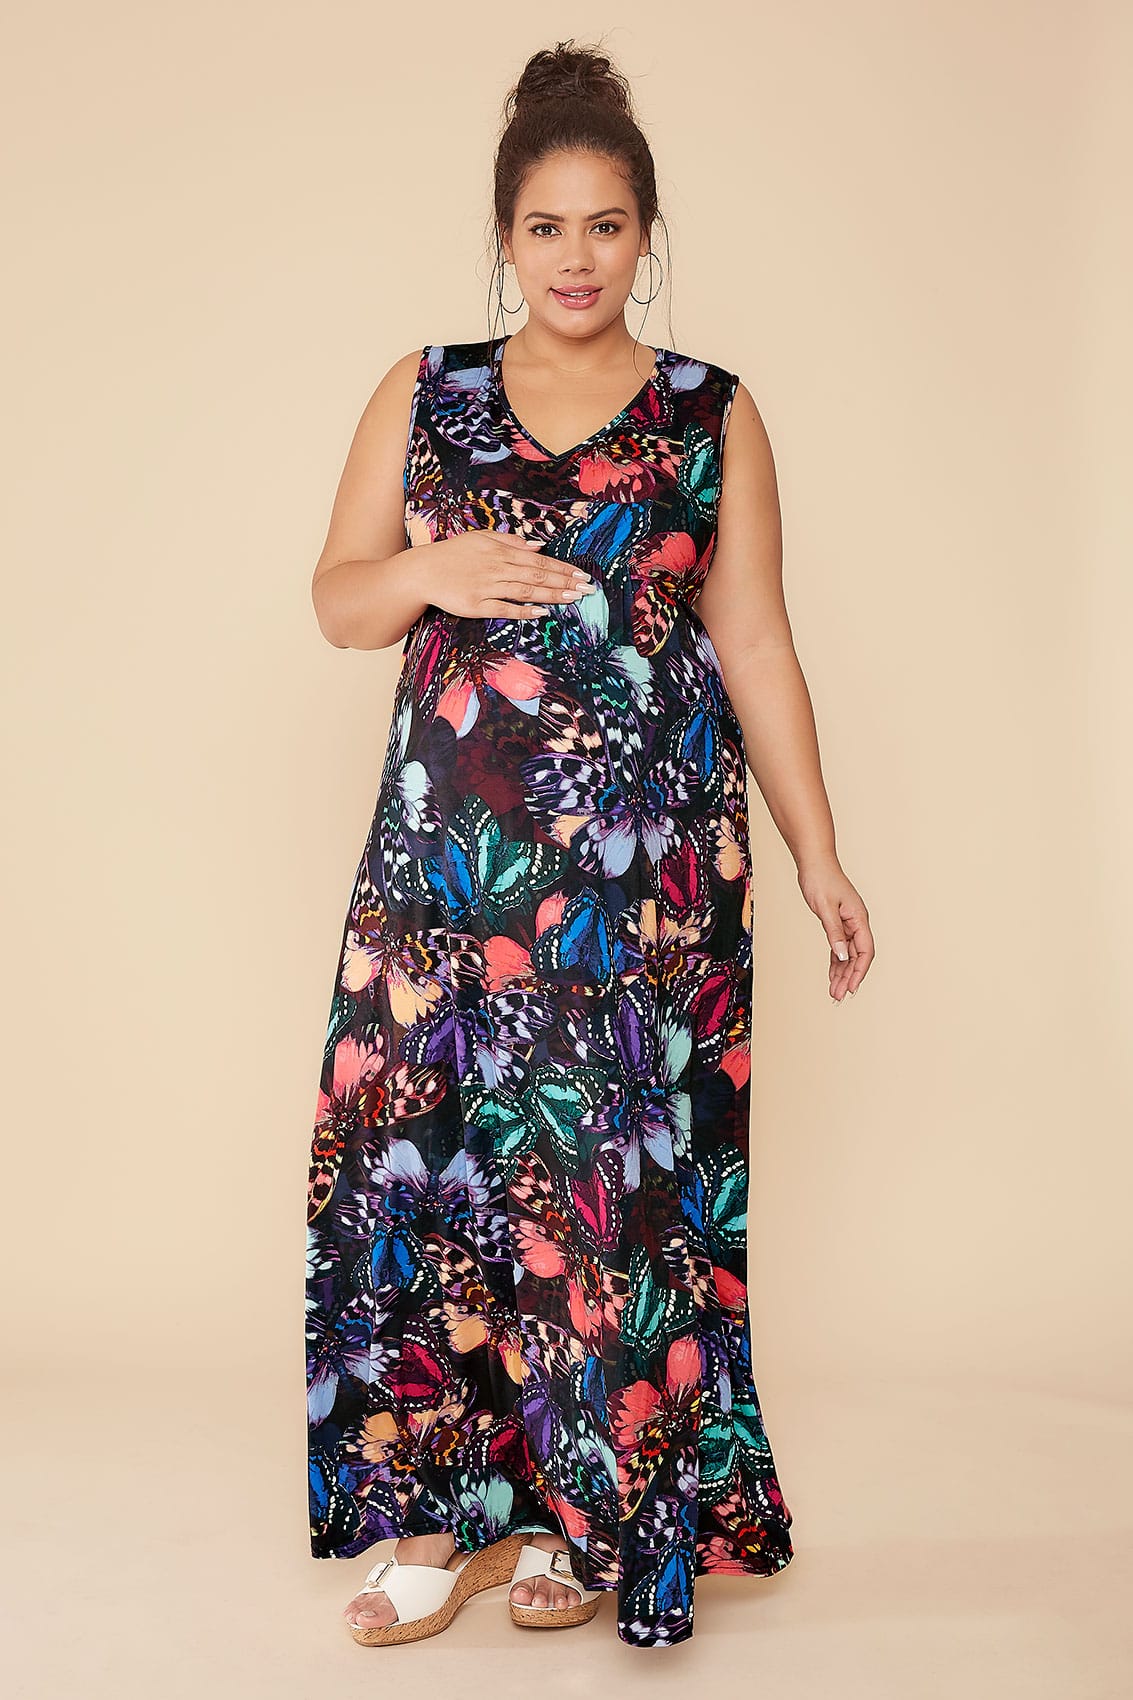 BUMP IT UP MATERNITY Multi Butterfly Print Maxi Dress Plus Size 16 to 32